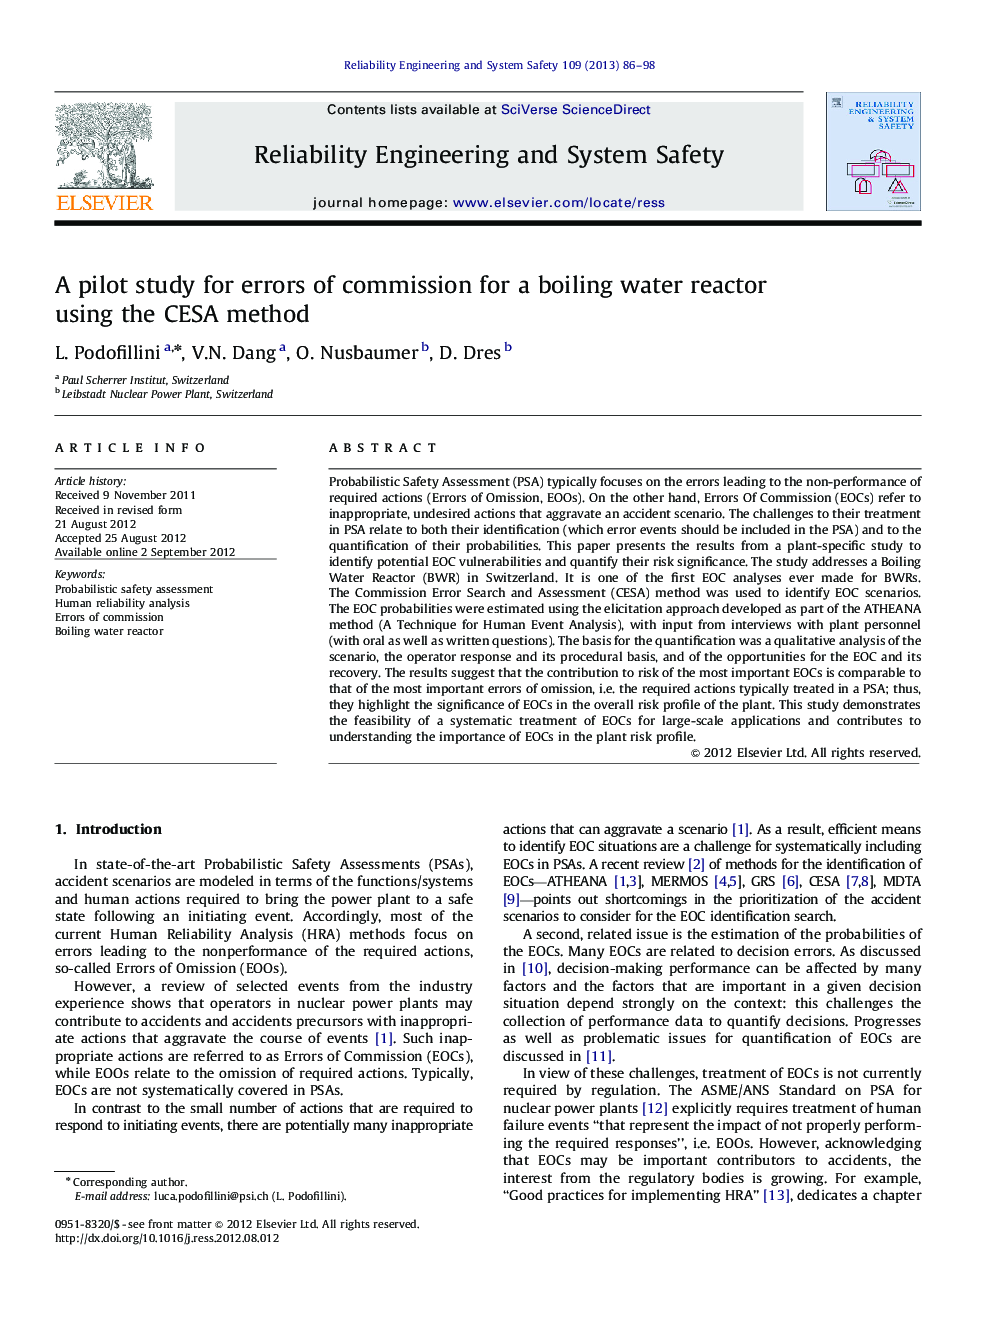 A pilot study for errors of commission for a boiling water reactor using the CESA method